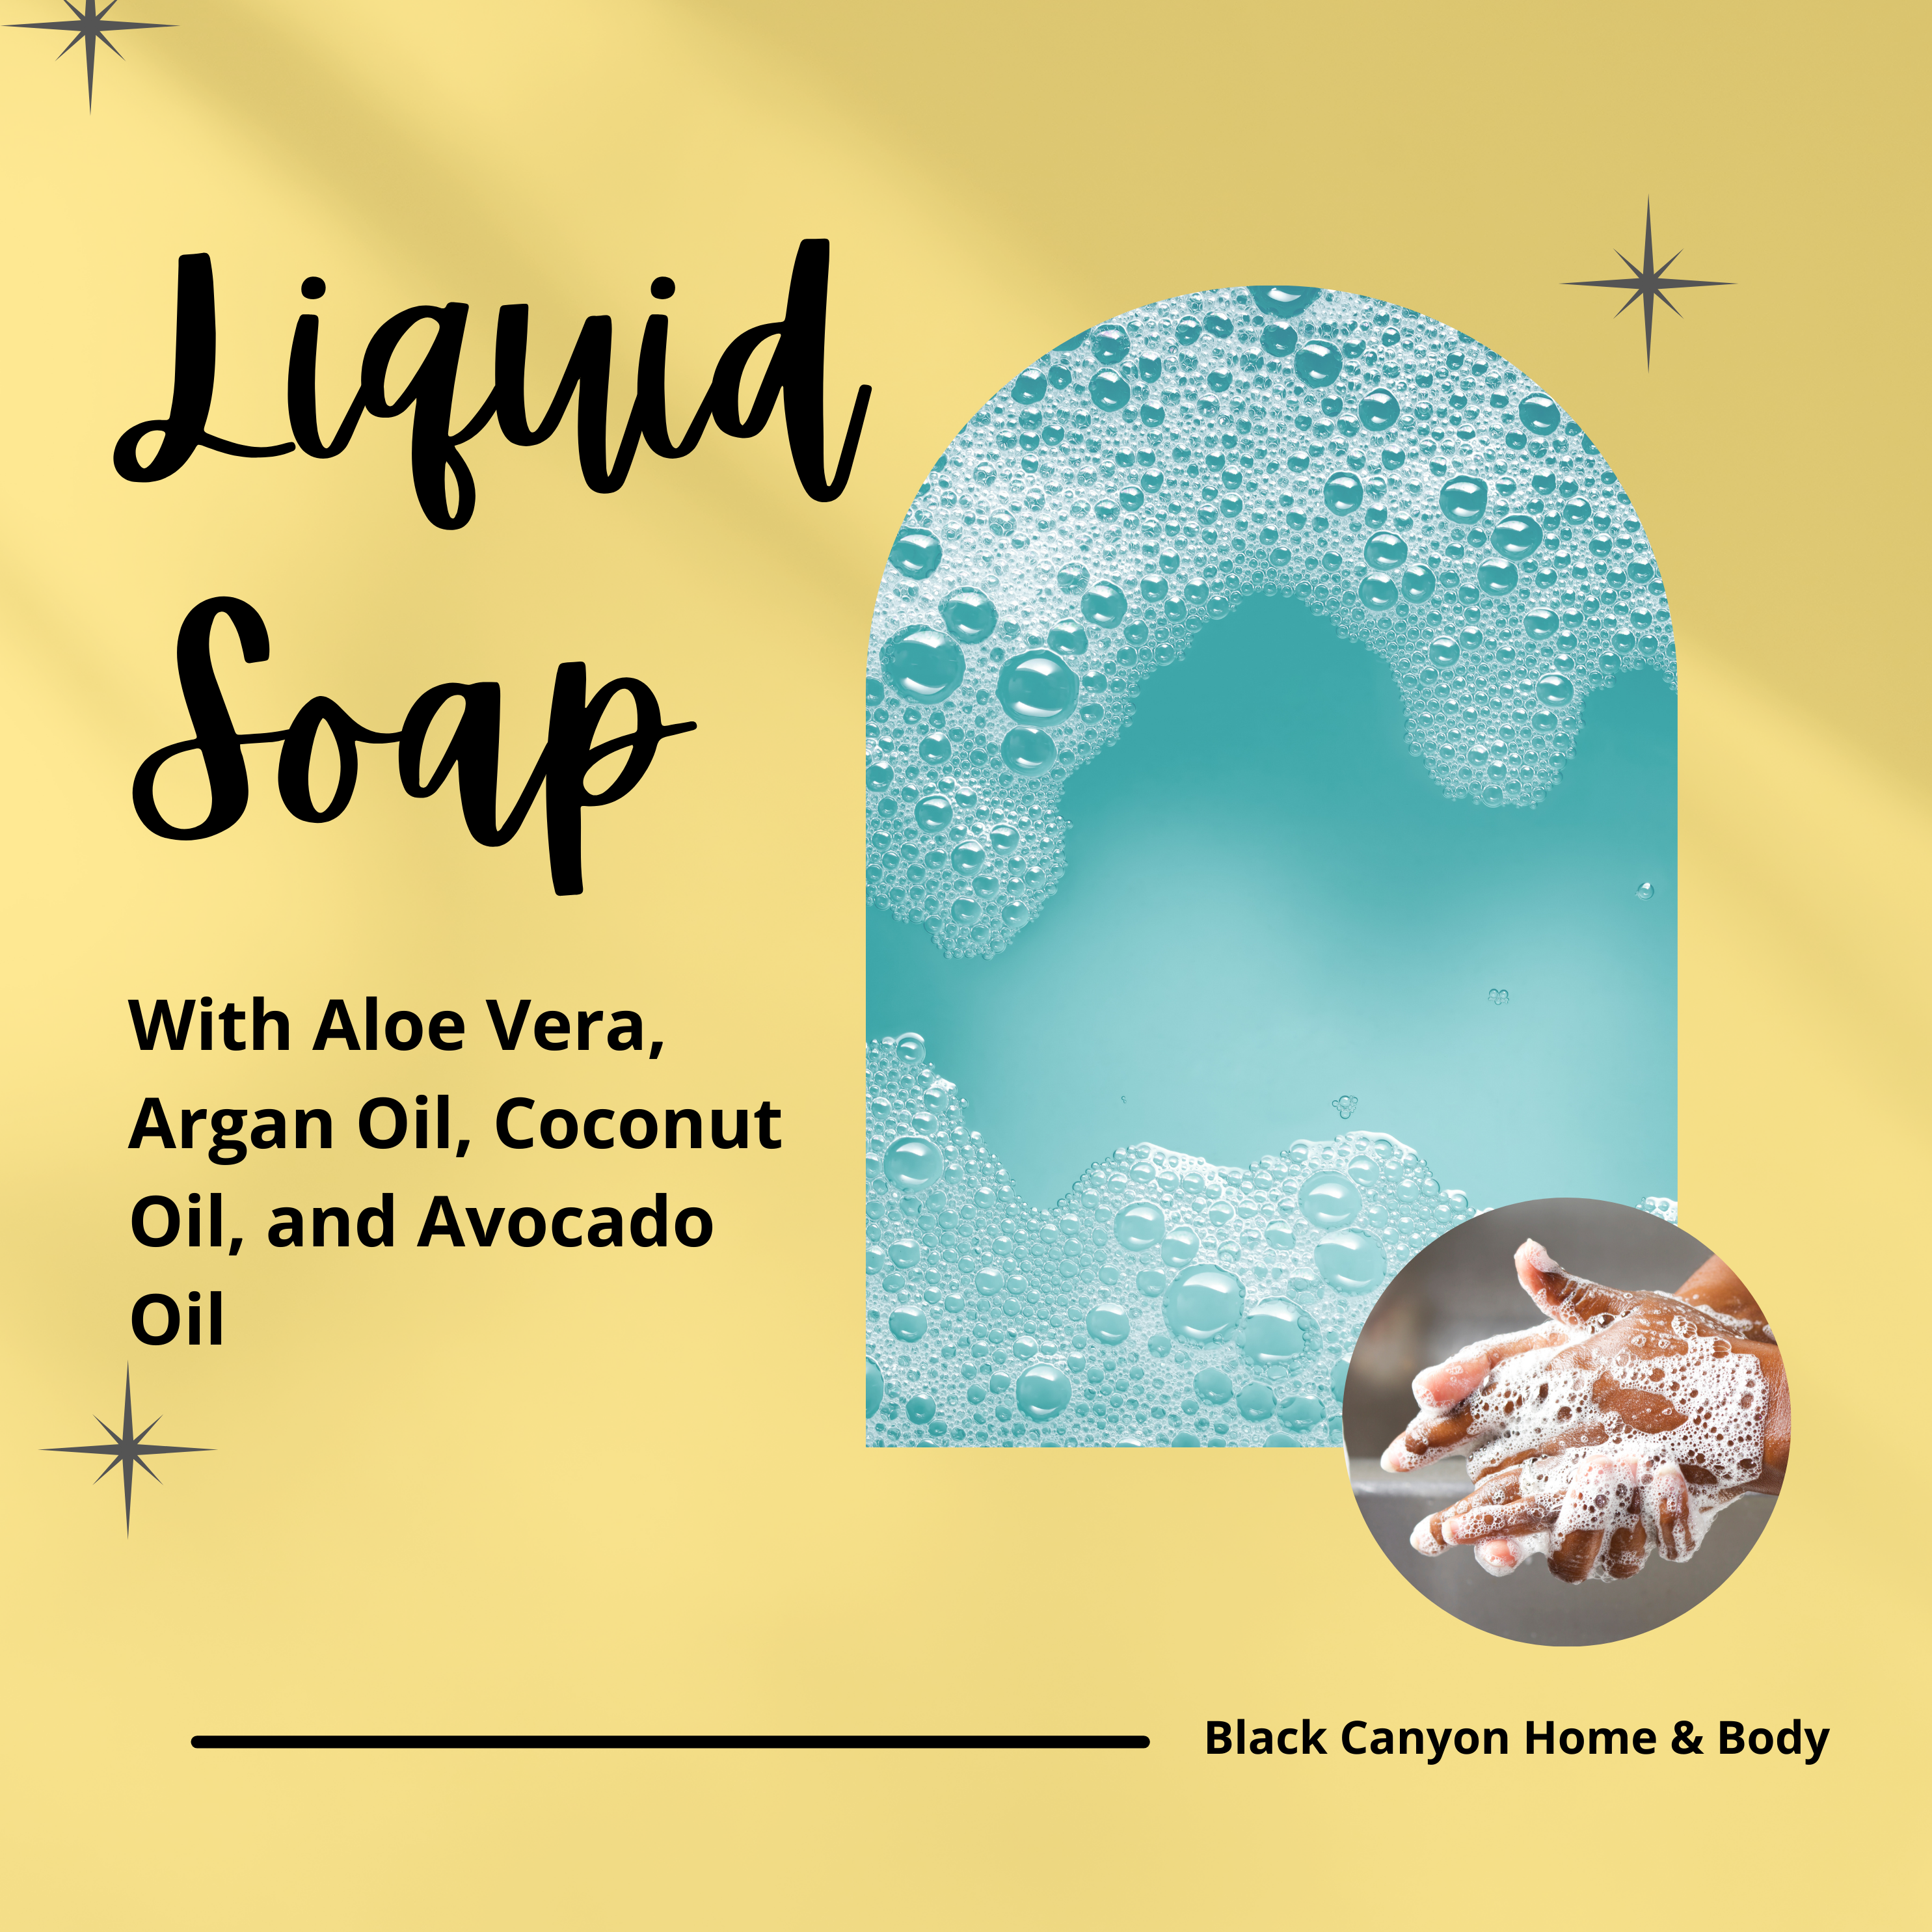 Black Canyon Ginger & Lime Scented Liquid Hand Soap